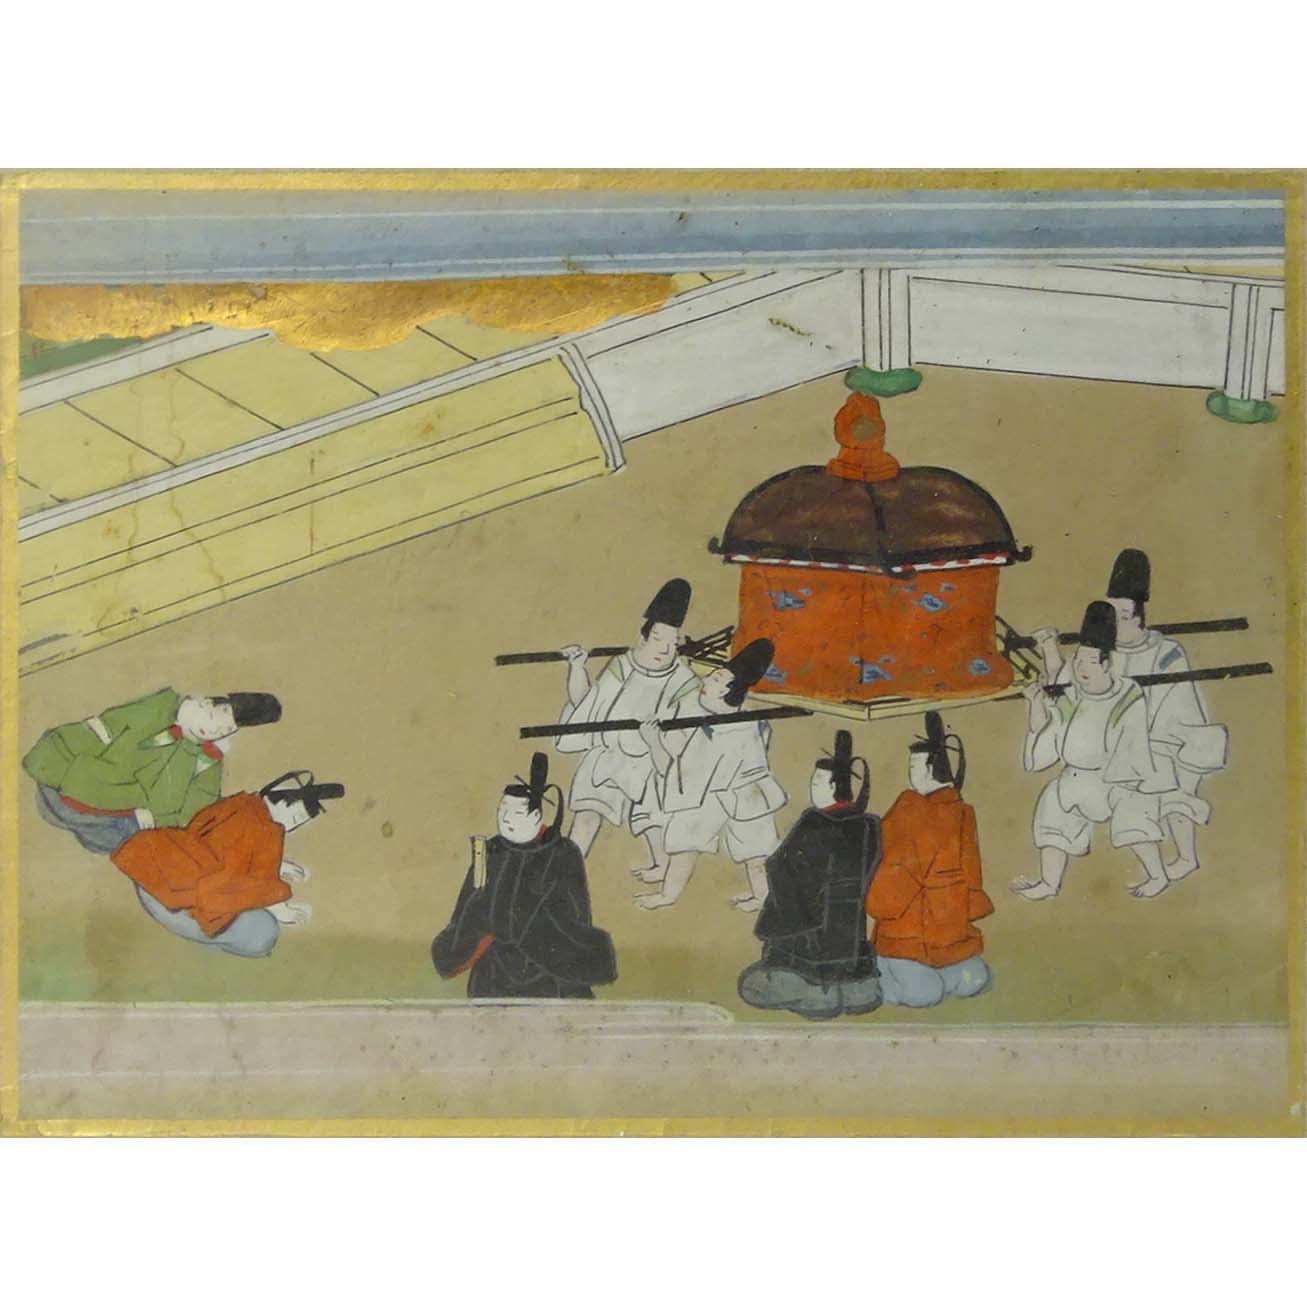 Collection of Two (2) 19th Century Japanese Tosa School Gouache Paintings.